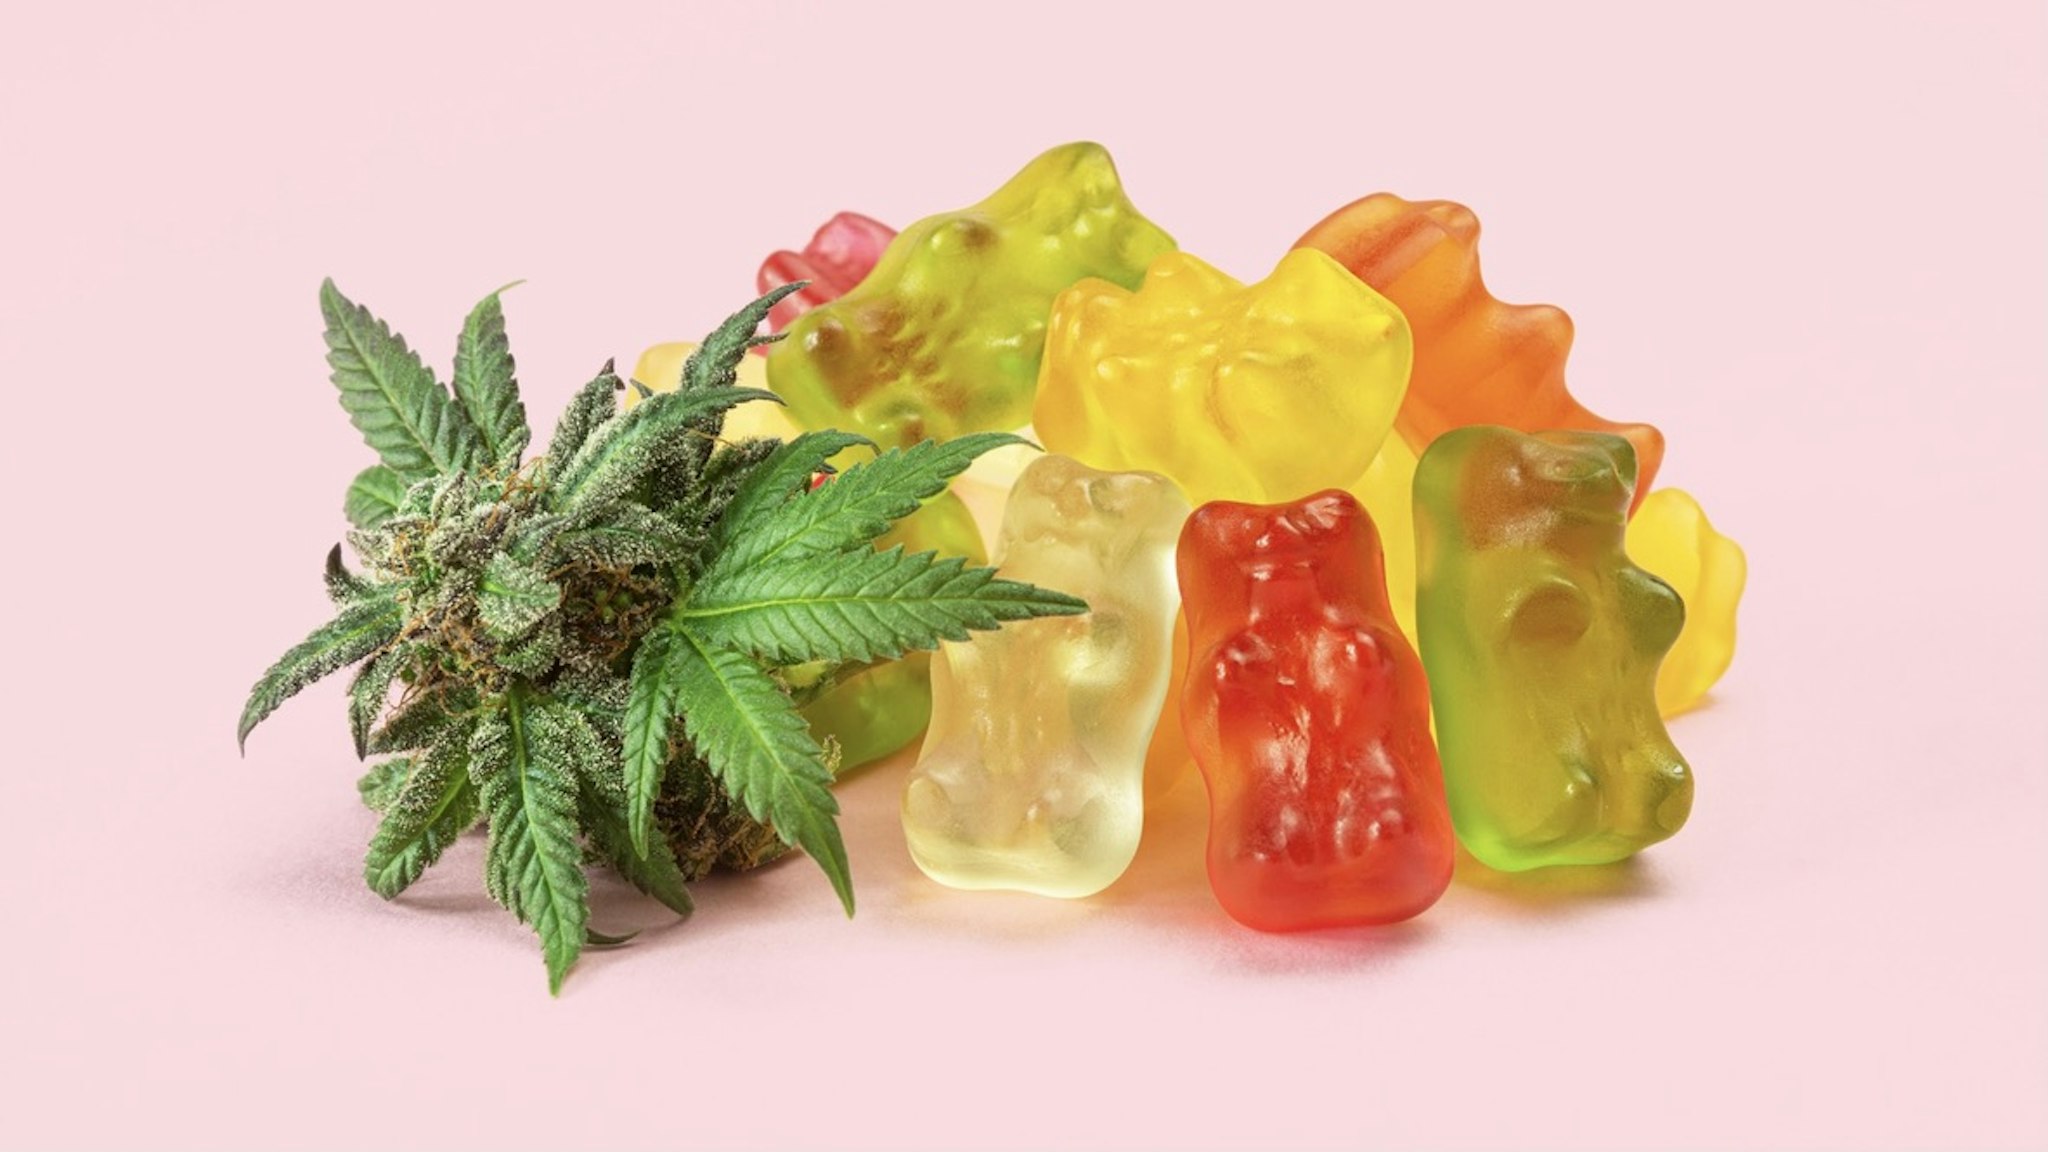 Gummy Bear Medical Marijuana Edibles (CBD or THC Candies) with Cannabis Bud Isolated on Pink Background - stock photo A pile of gummy bears made with cannabis extract next to a fresh bud or hemp flower. These medical marijuana edibles contain CBD and THC and are isolated on a pink background. viennetta via Getty Images